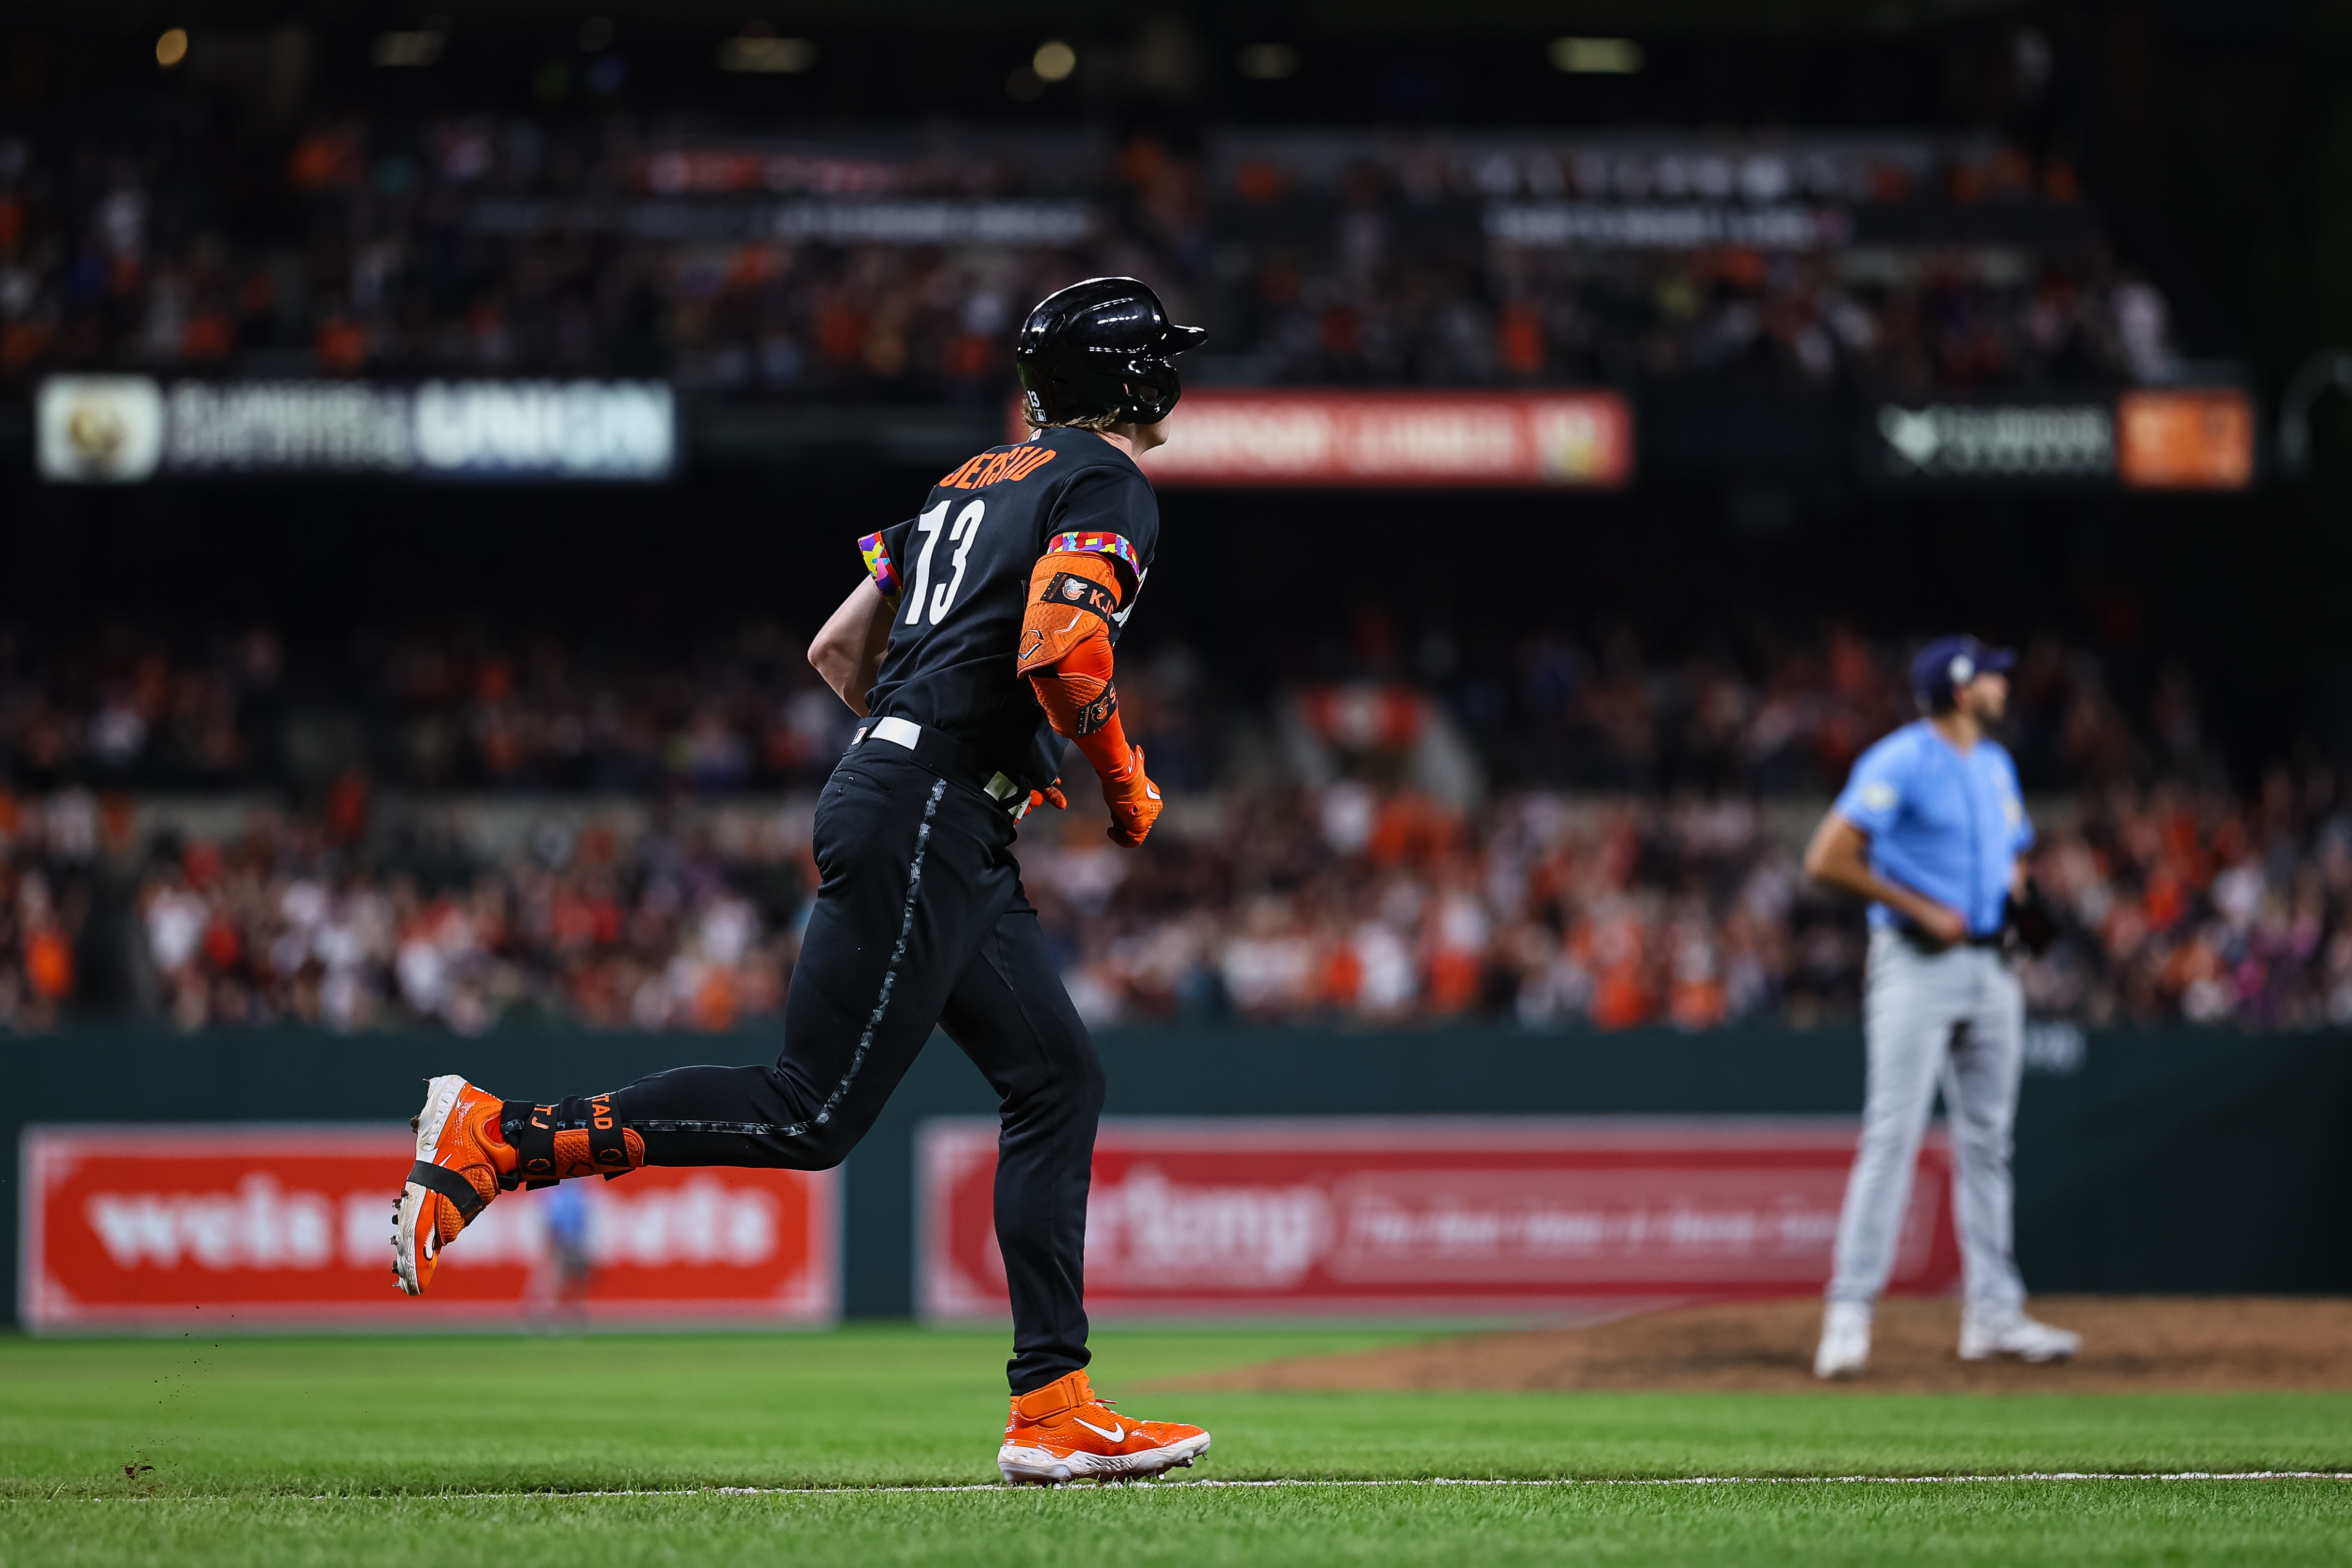 Rays tie Orioles atop AL East with latest win